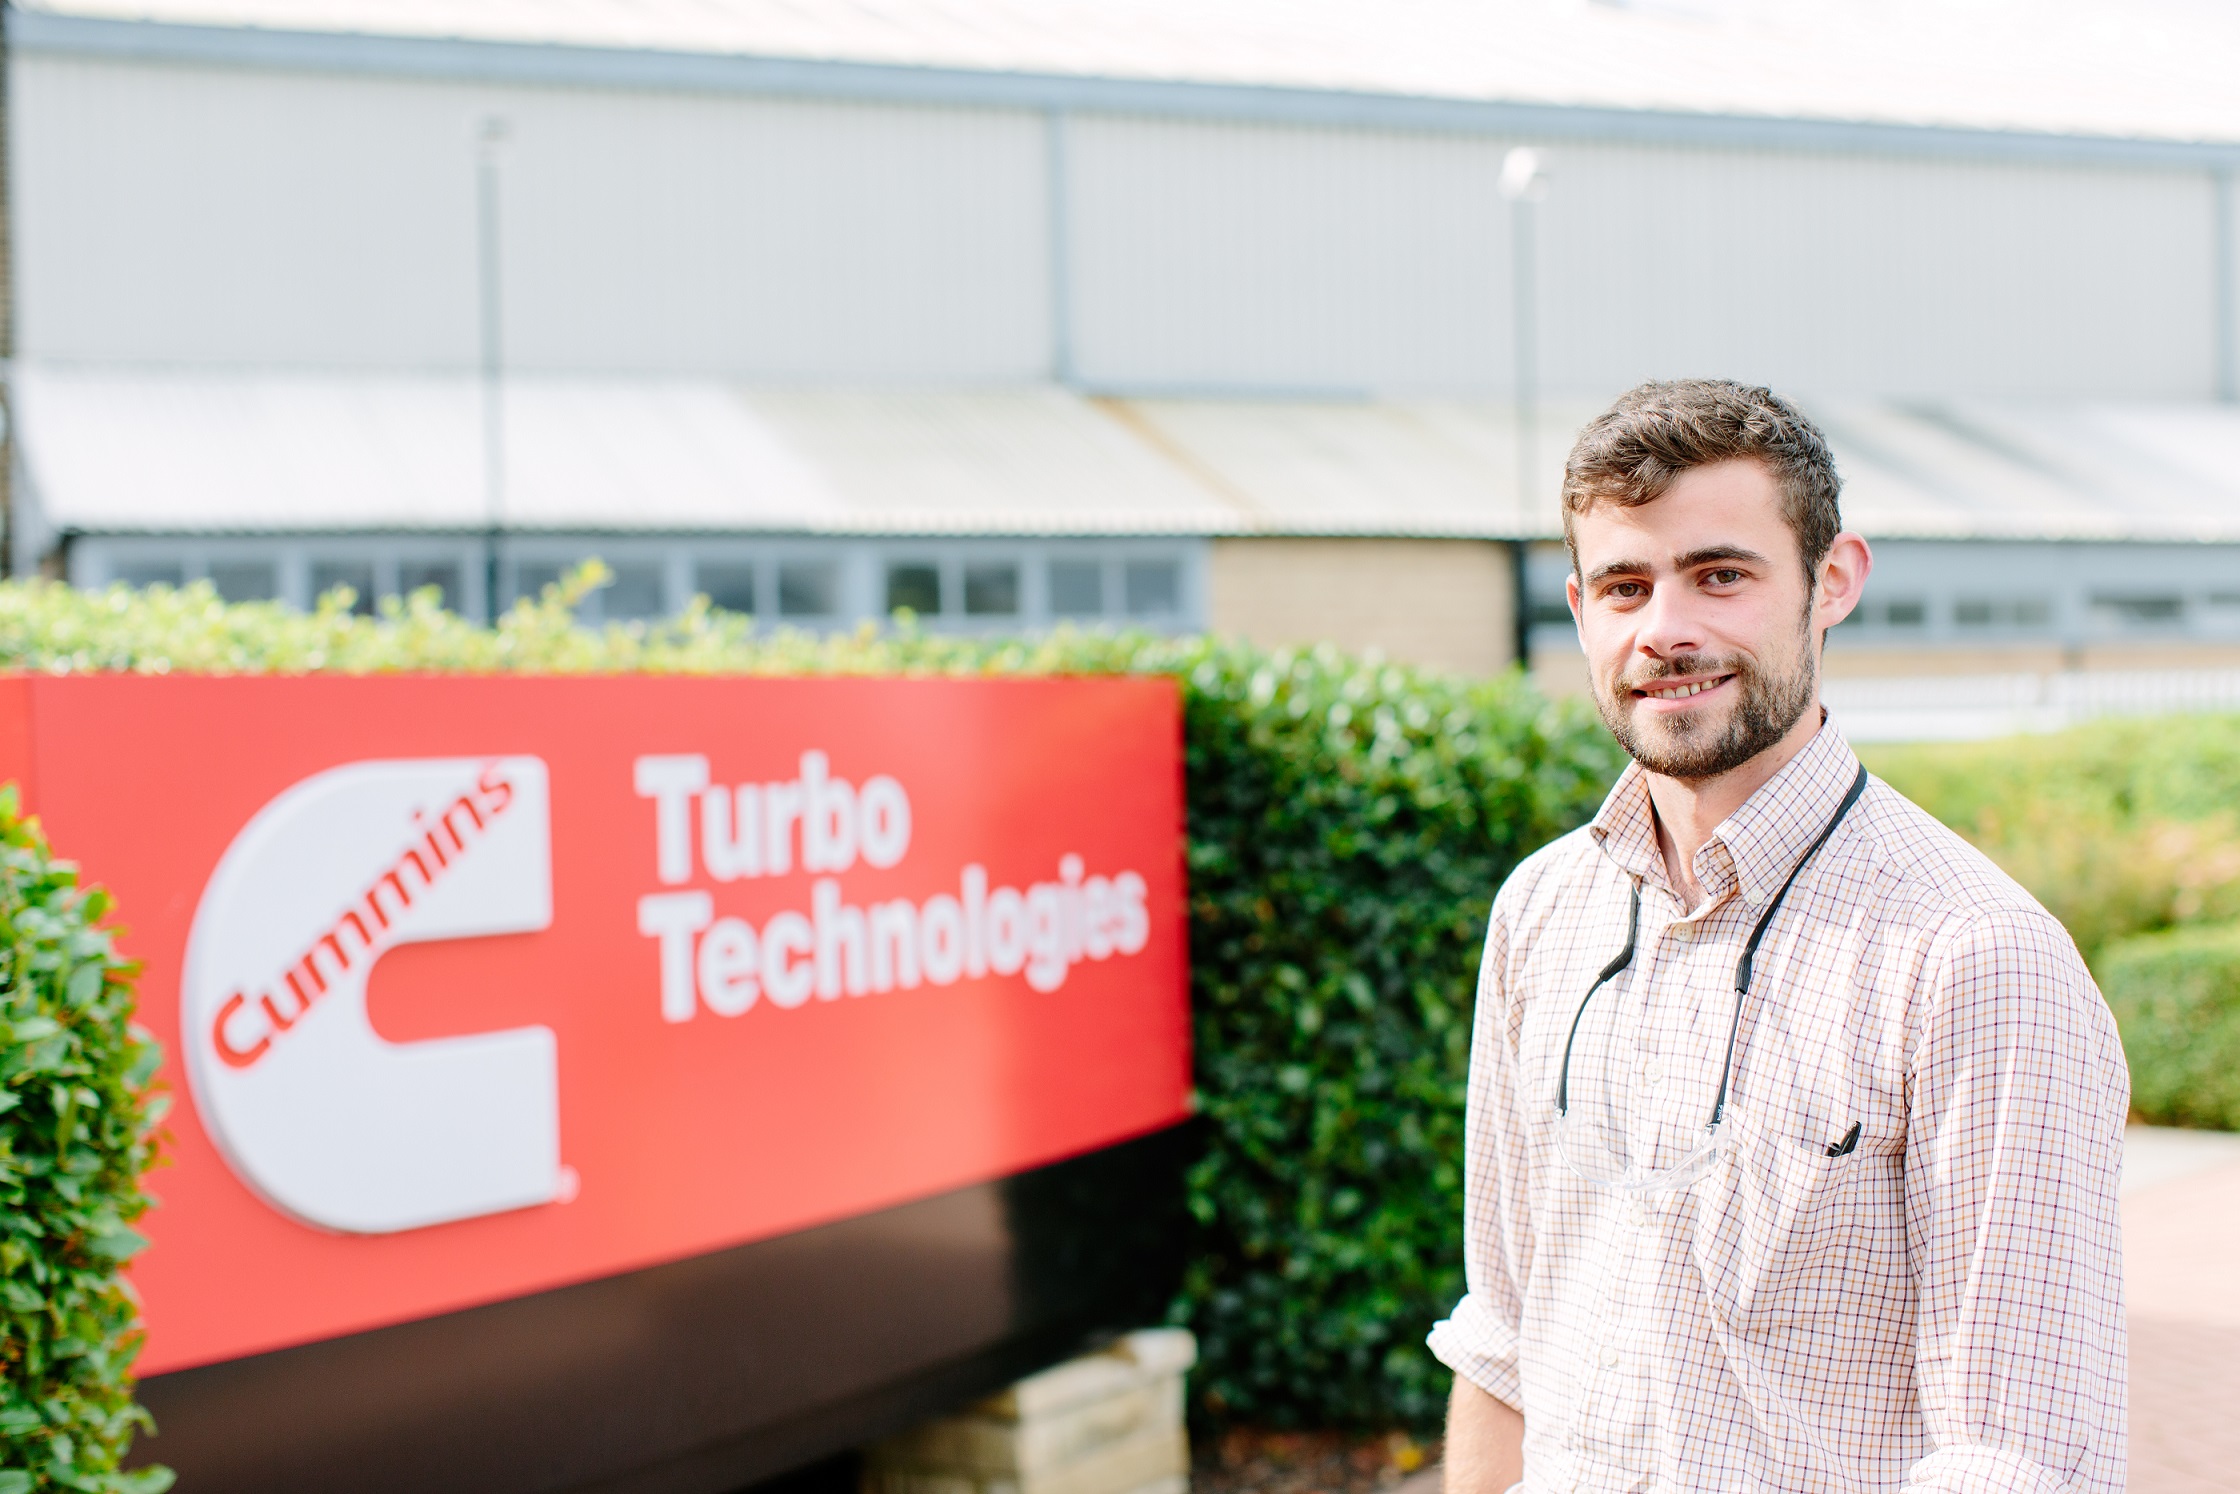 Mike Scott on his industrial placement at Turbo Technologies.